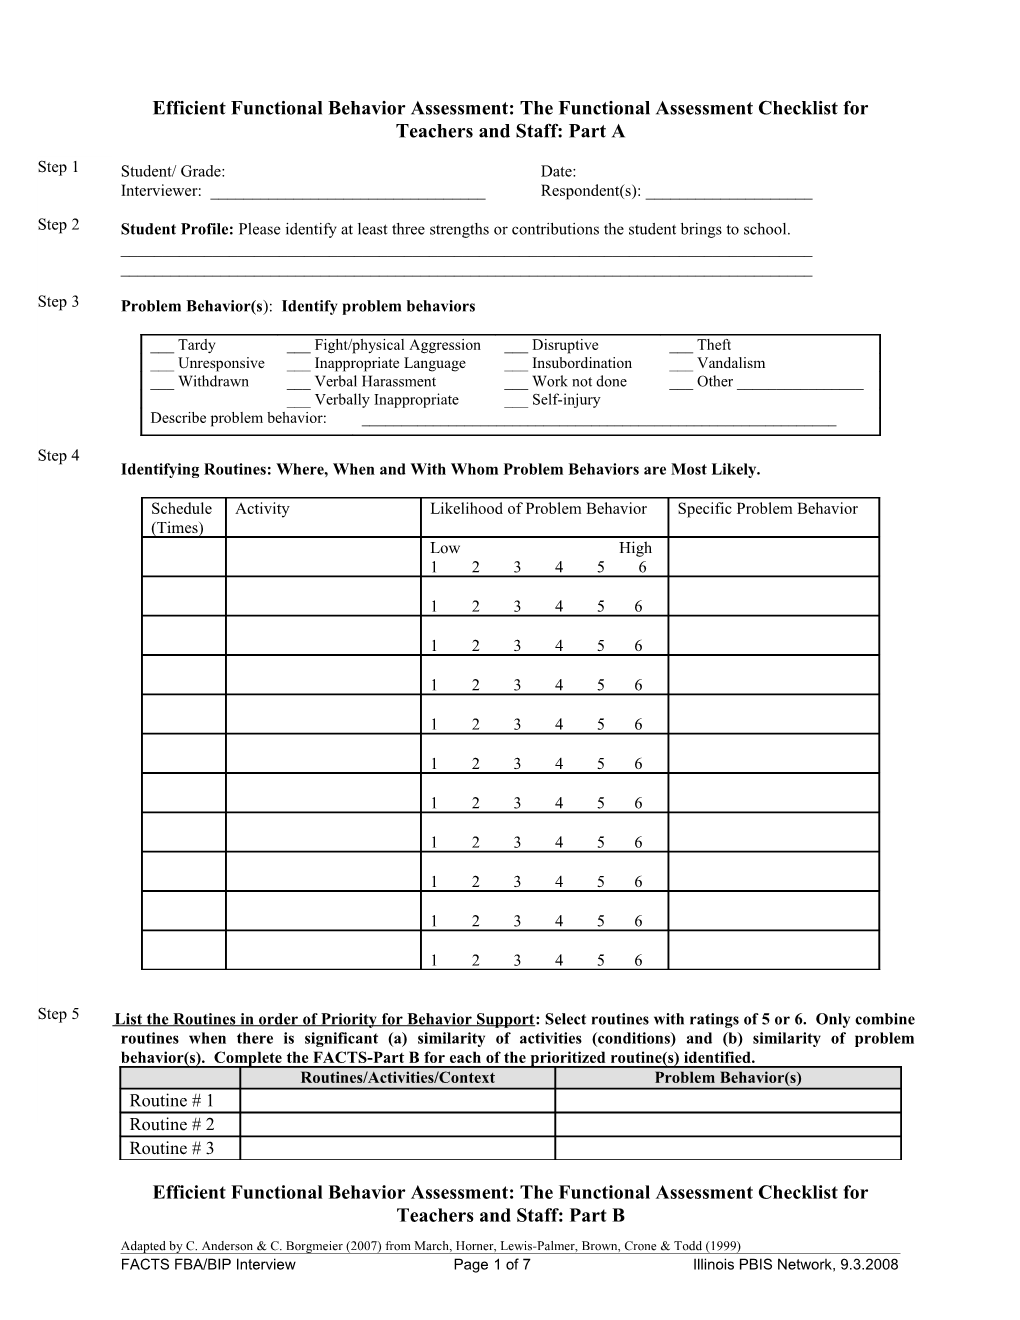 Functional Assessment Checklist For Teachers And Staff (FACTS-A)